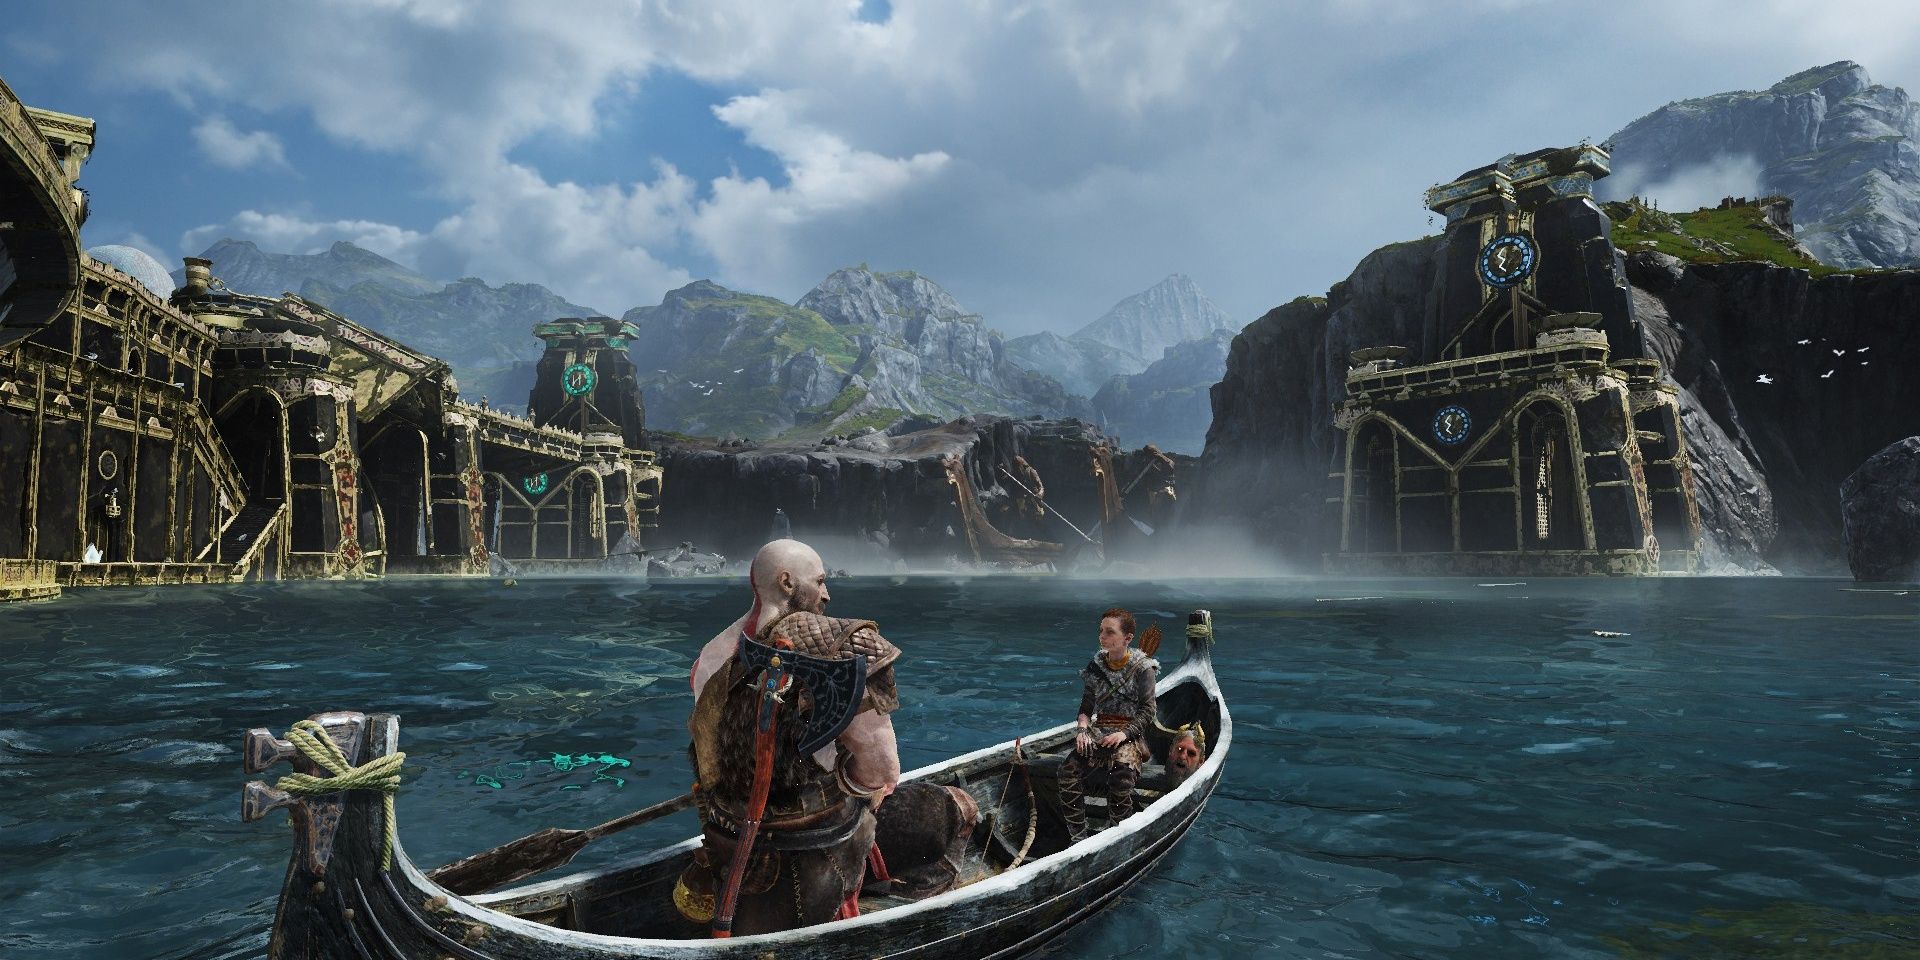 Kratos and Atreus in boat